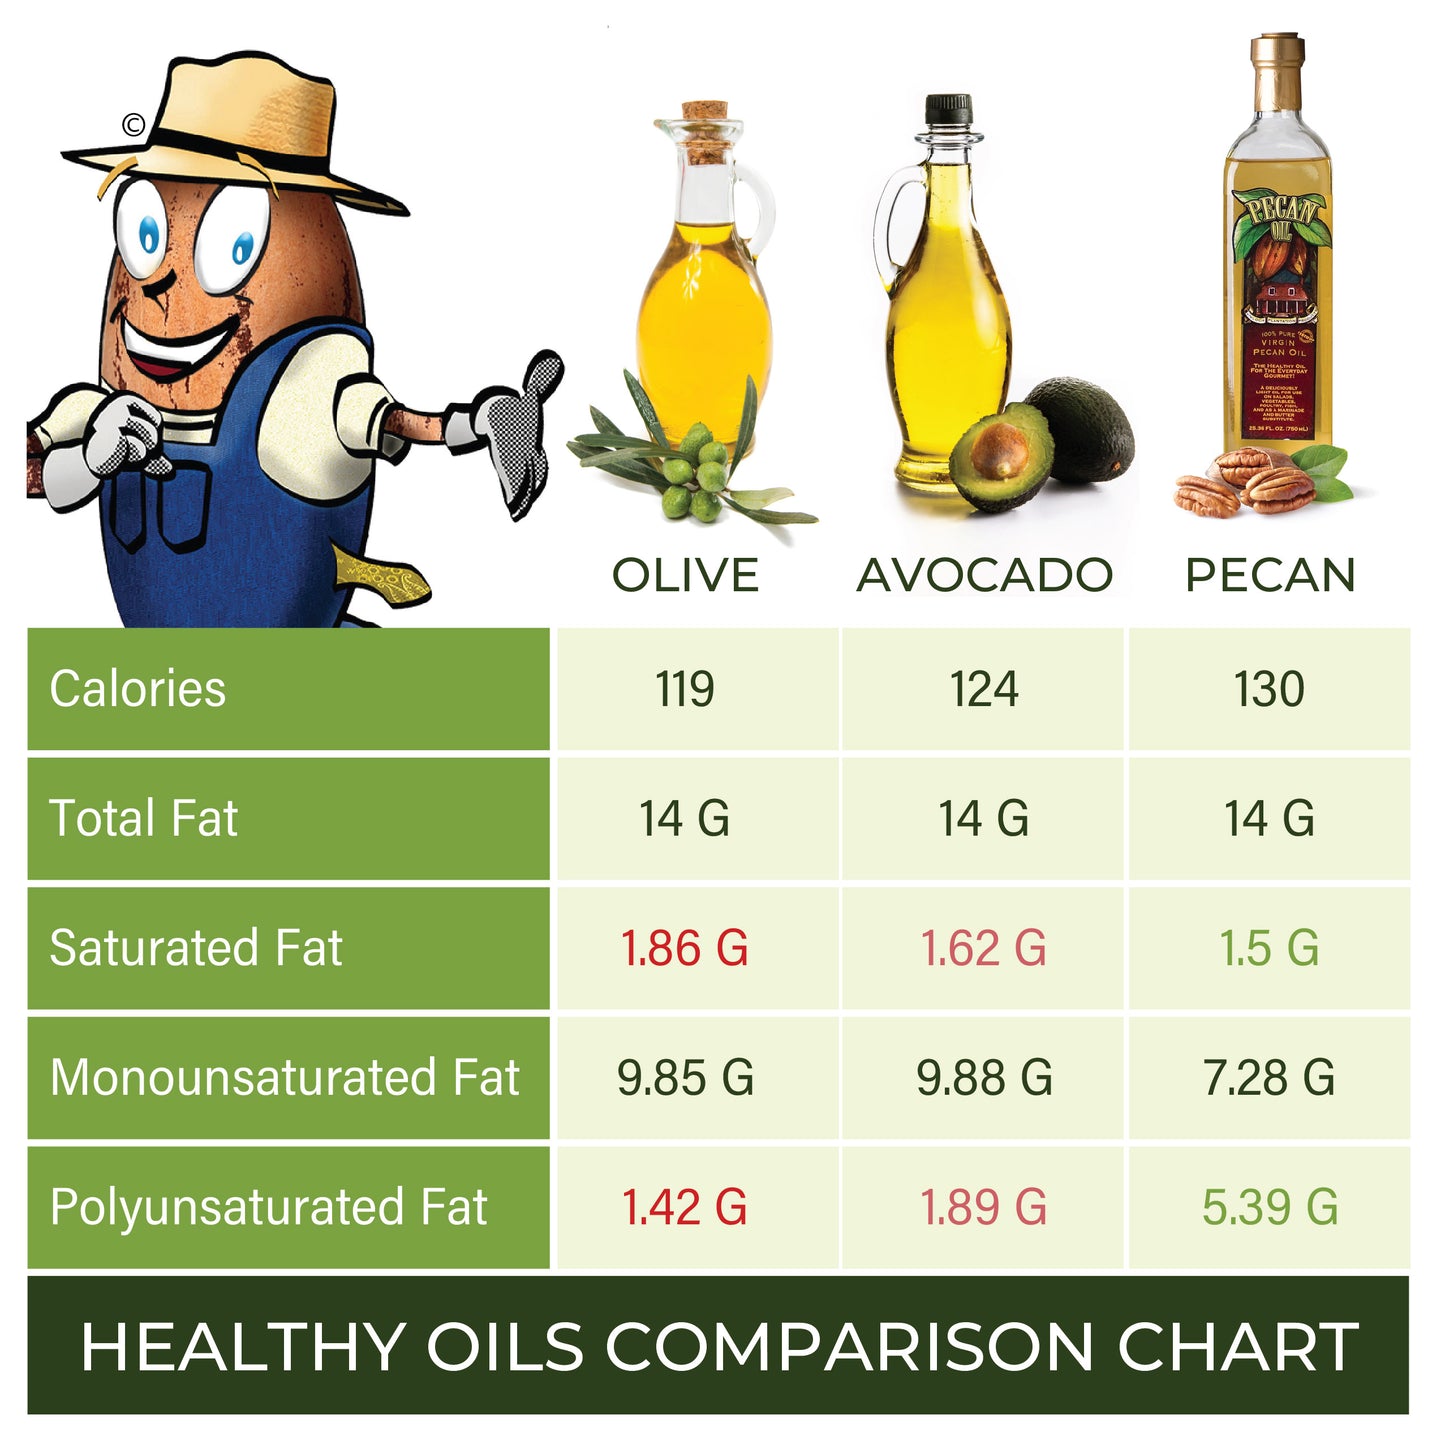 Olive oil, avocado oil, and pecan oil comparison chart. Less fat than olive oil, better than avocado oil, heart-healthy fats. Pecan oil is the lowest in unhealthy saturated fat and highest in healthy polyunsaturated fat. Best oil for salads.